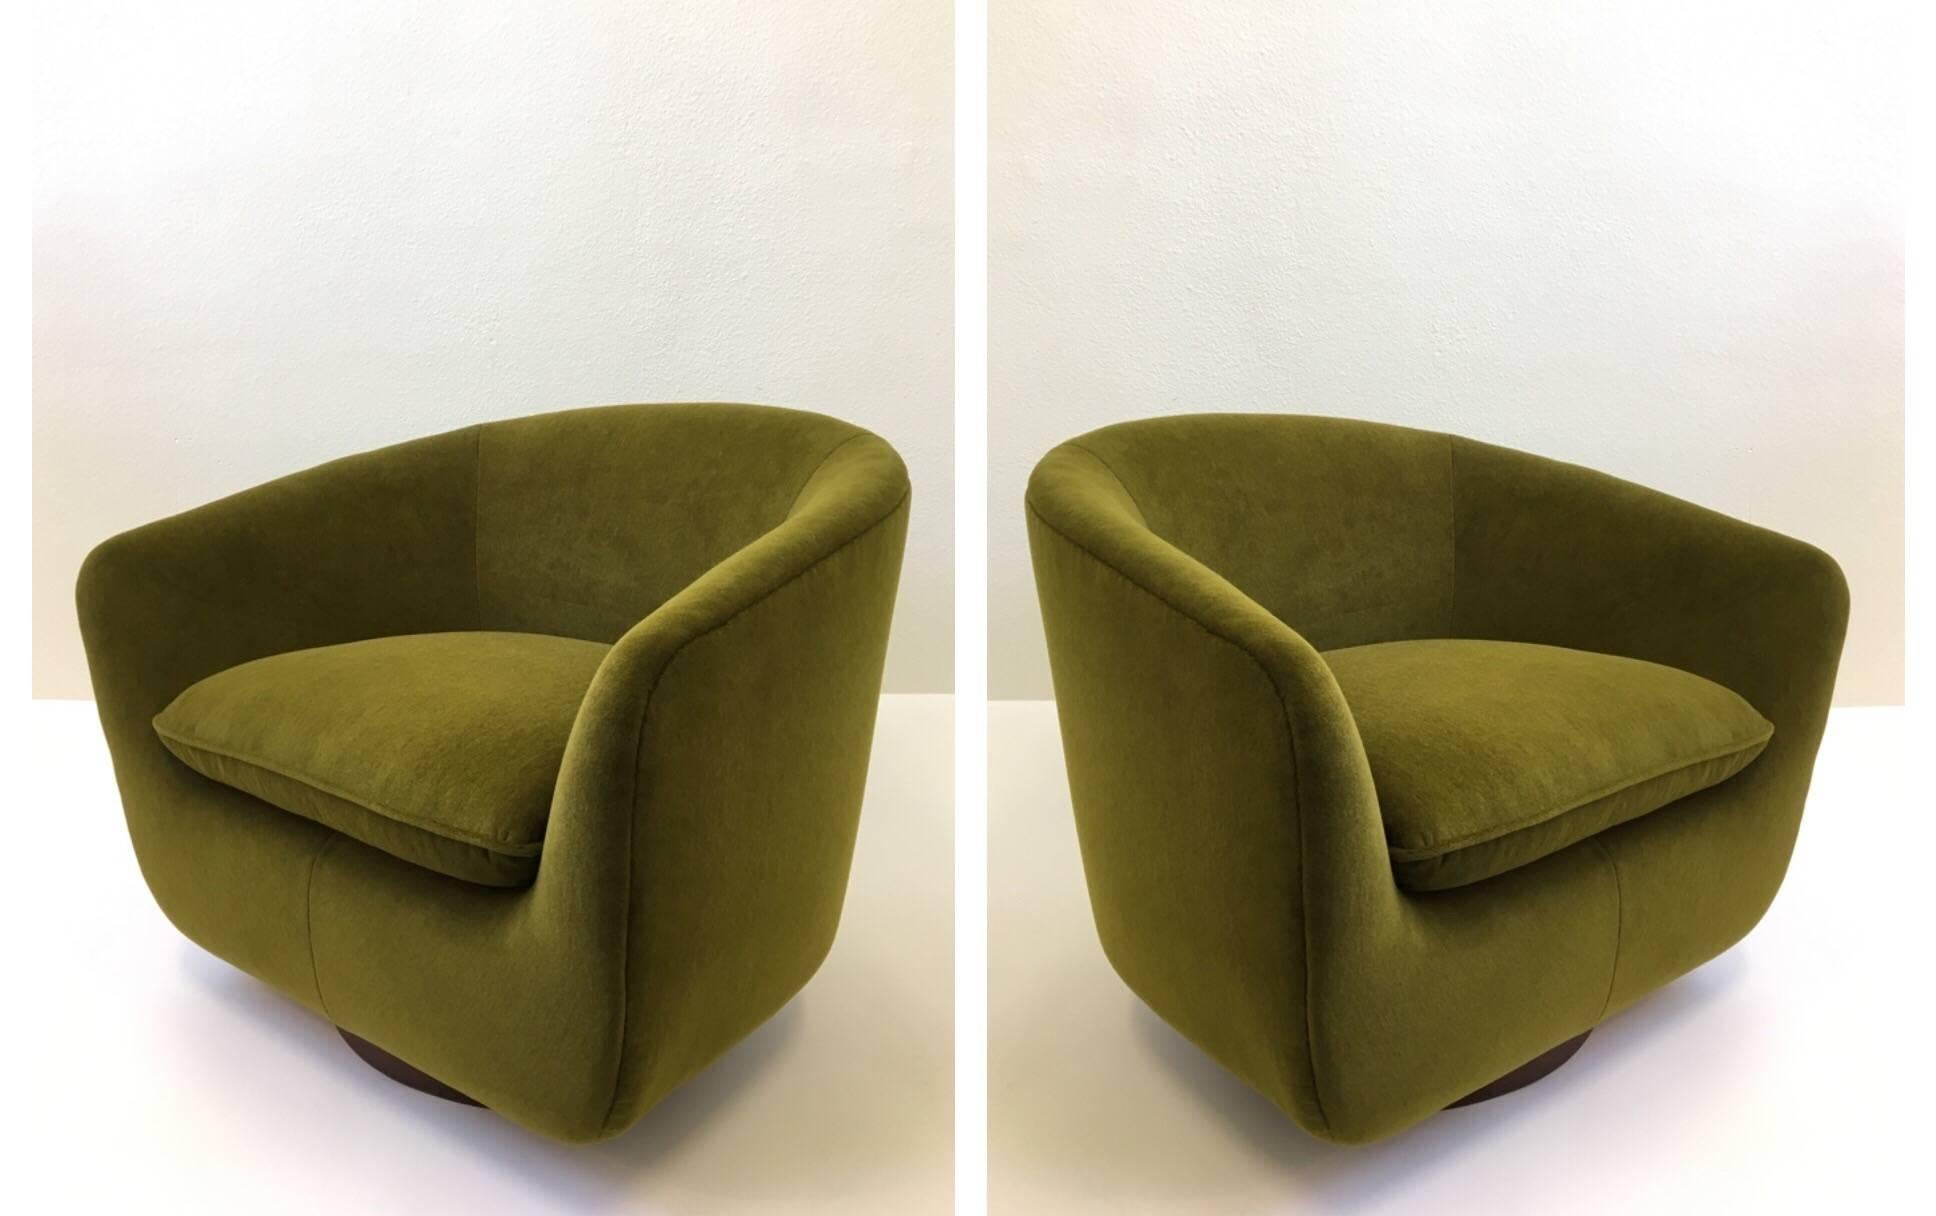 A pair of spectacular swivle lounge chairs designed by Edward Wormley for Dunbar. This chairs are newly reupholstered in a beautiful soft olive green Mohair fabric. The dark walnut wood base is in original finish. 

Dimensions: 28